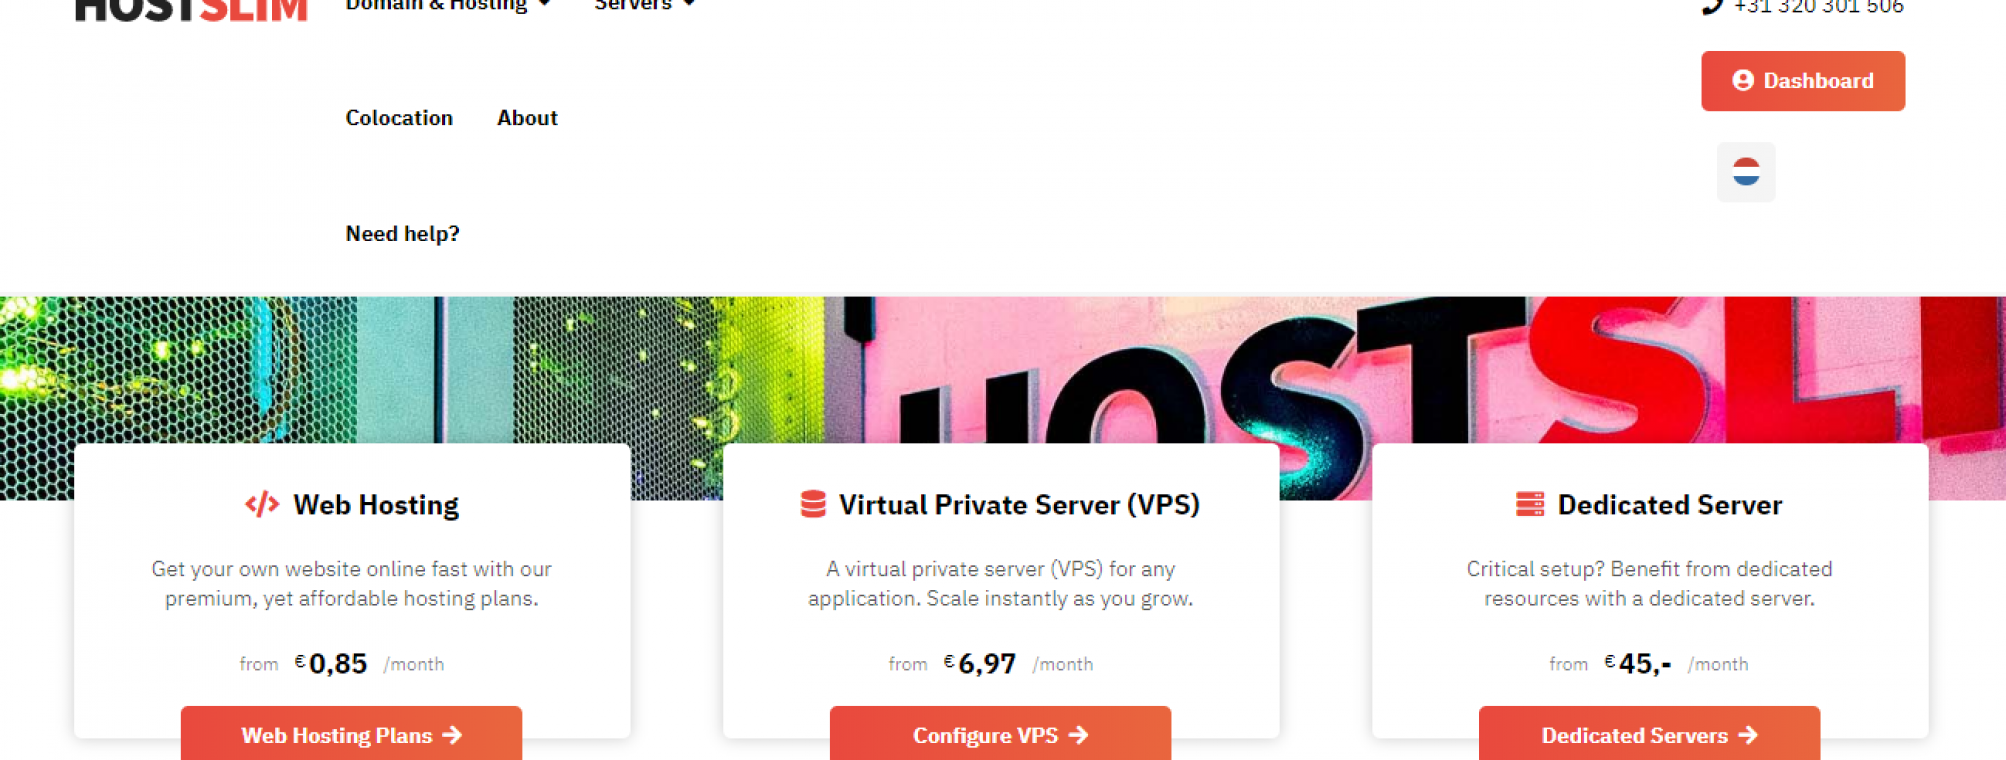 [NL OFFSHORE]VPSslim ***** 100% PURE SSD VPS DEALS - NEW PLANS ADDED ...